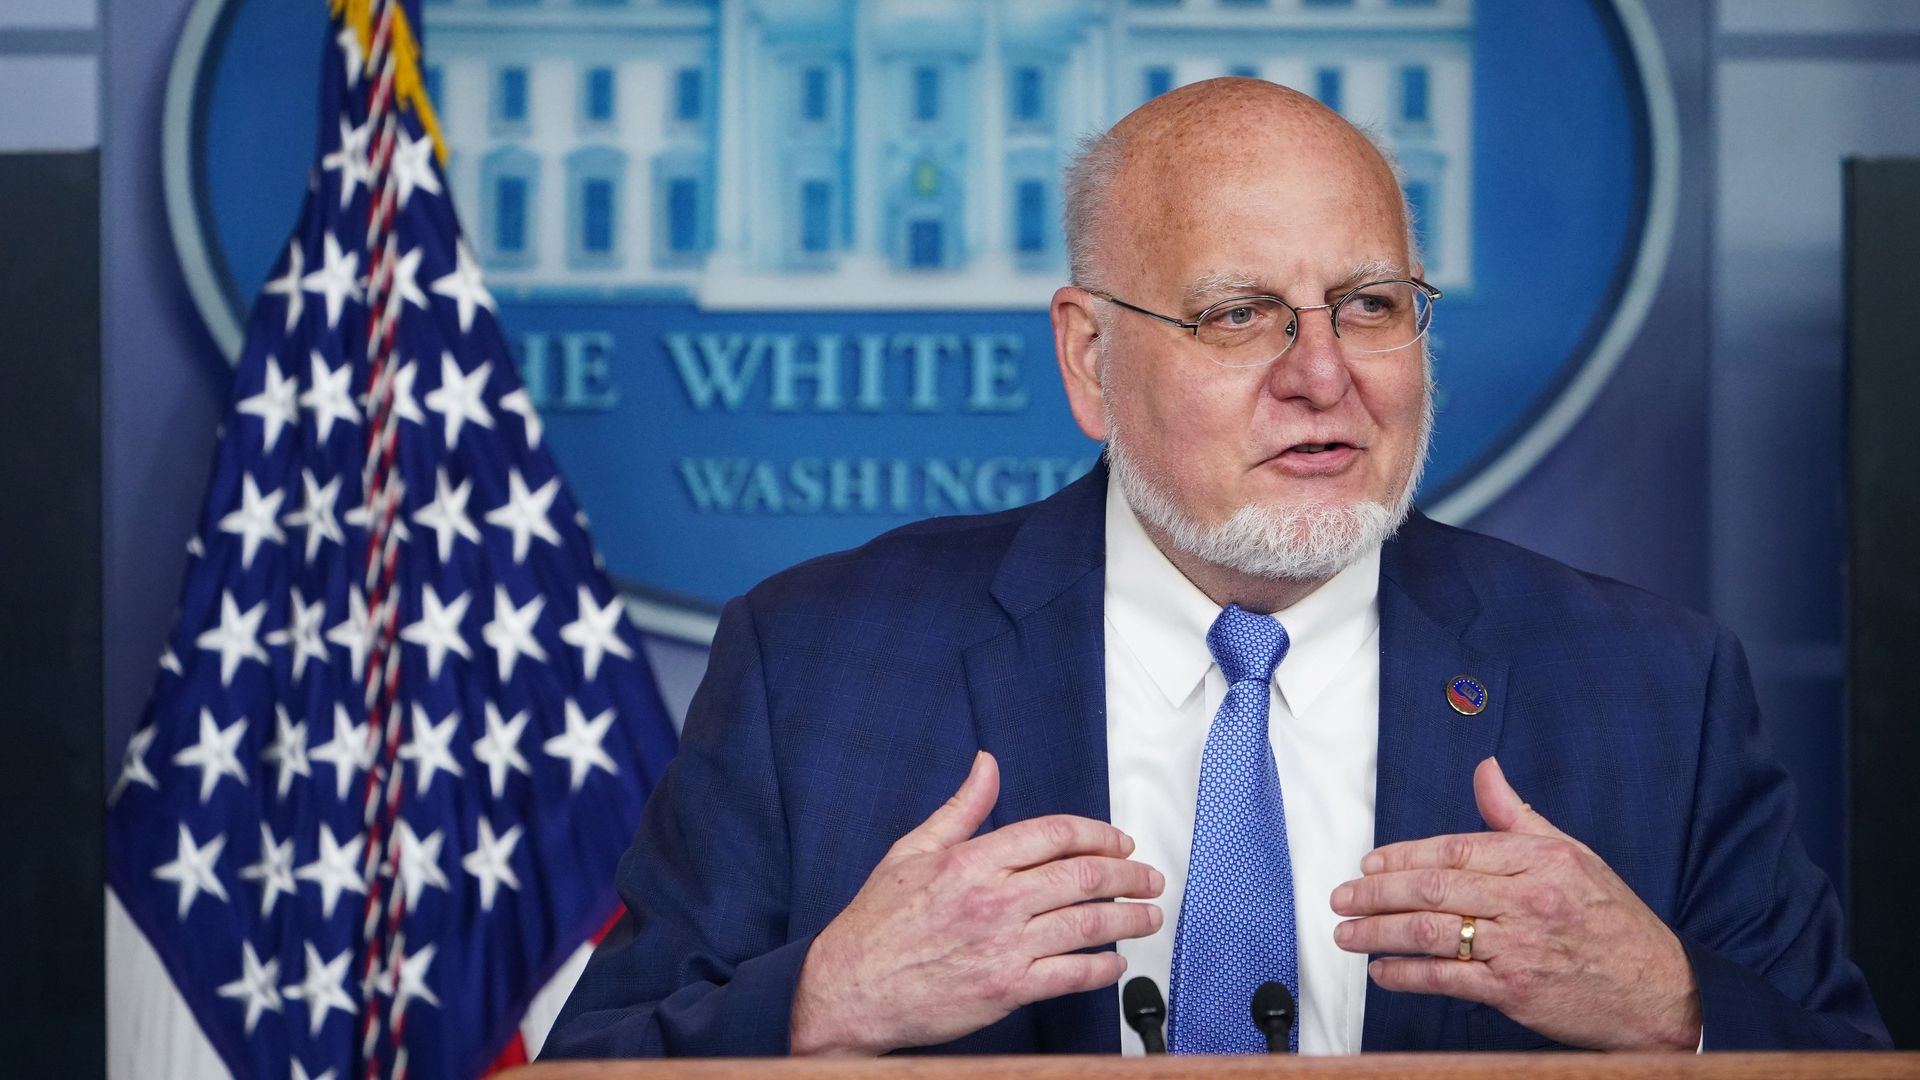 This image shows CDC director Robert Redfield in front of the White House insignia 